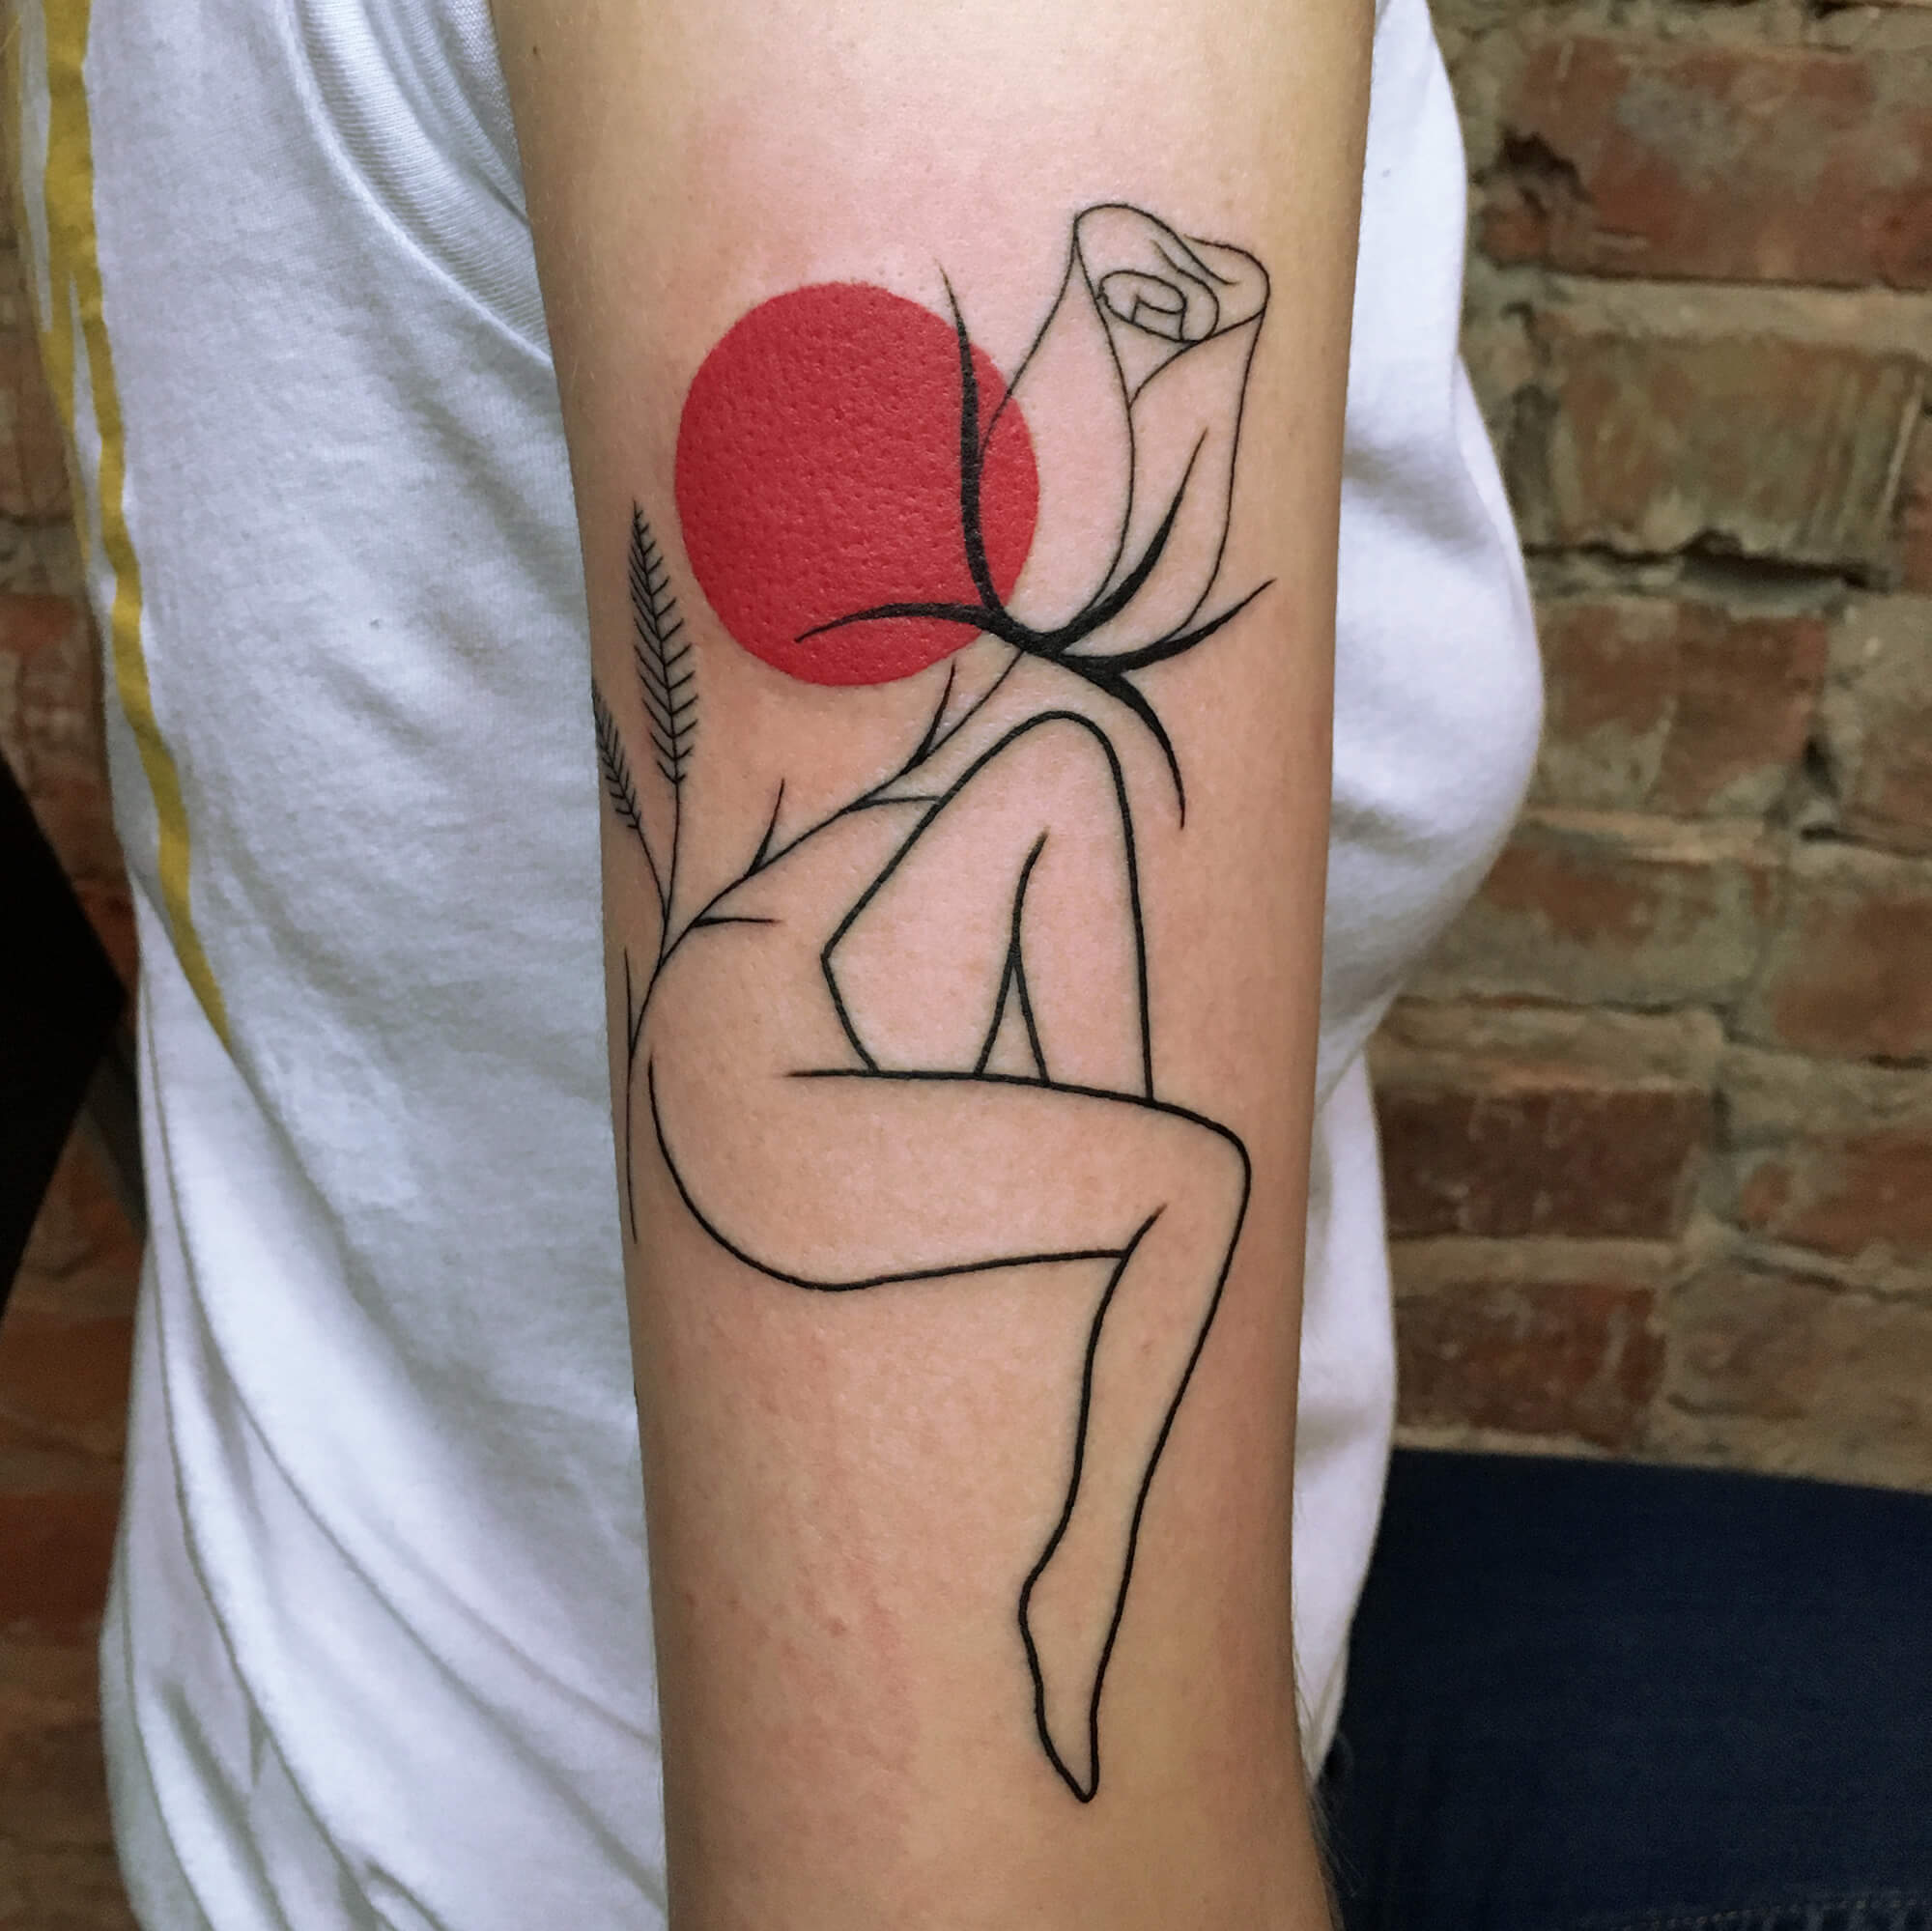 Line tattoo with red dot accent